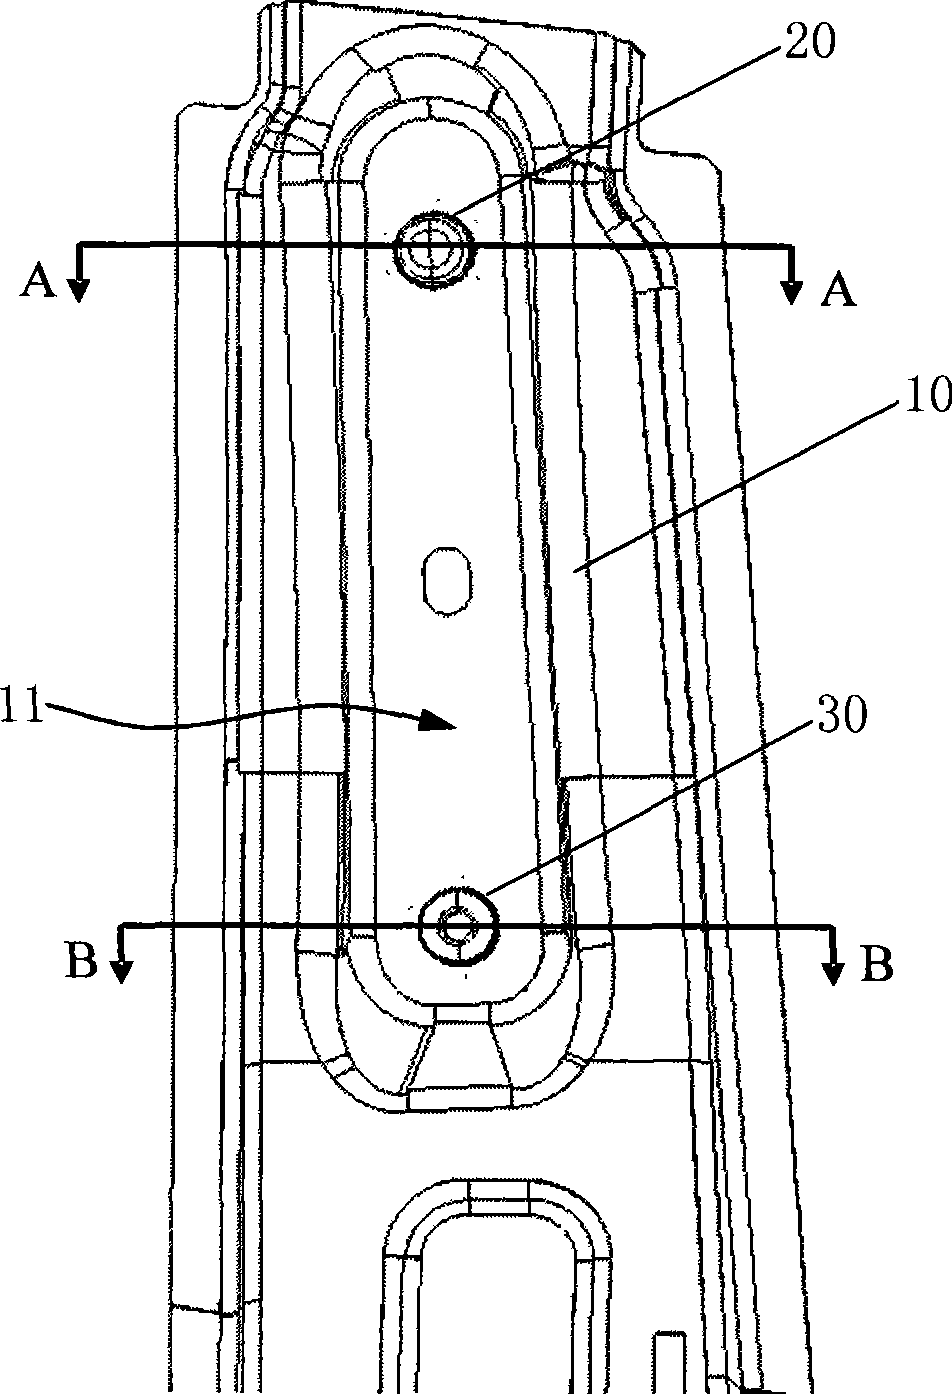 Fixing device for automobile seat belt